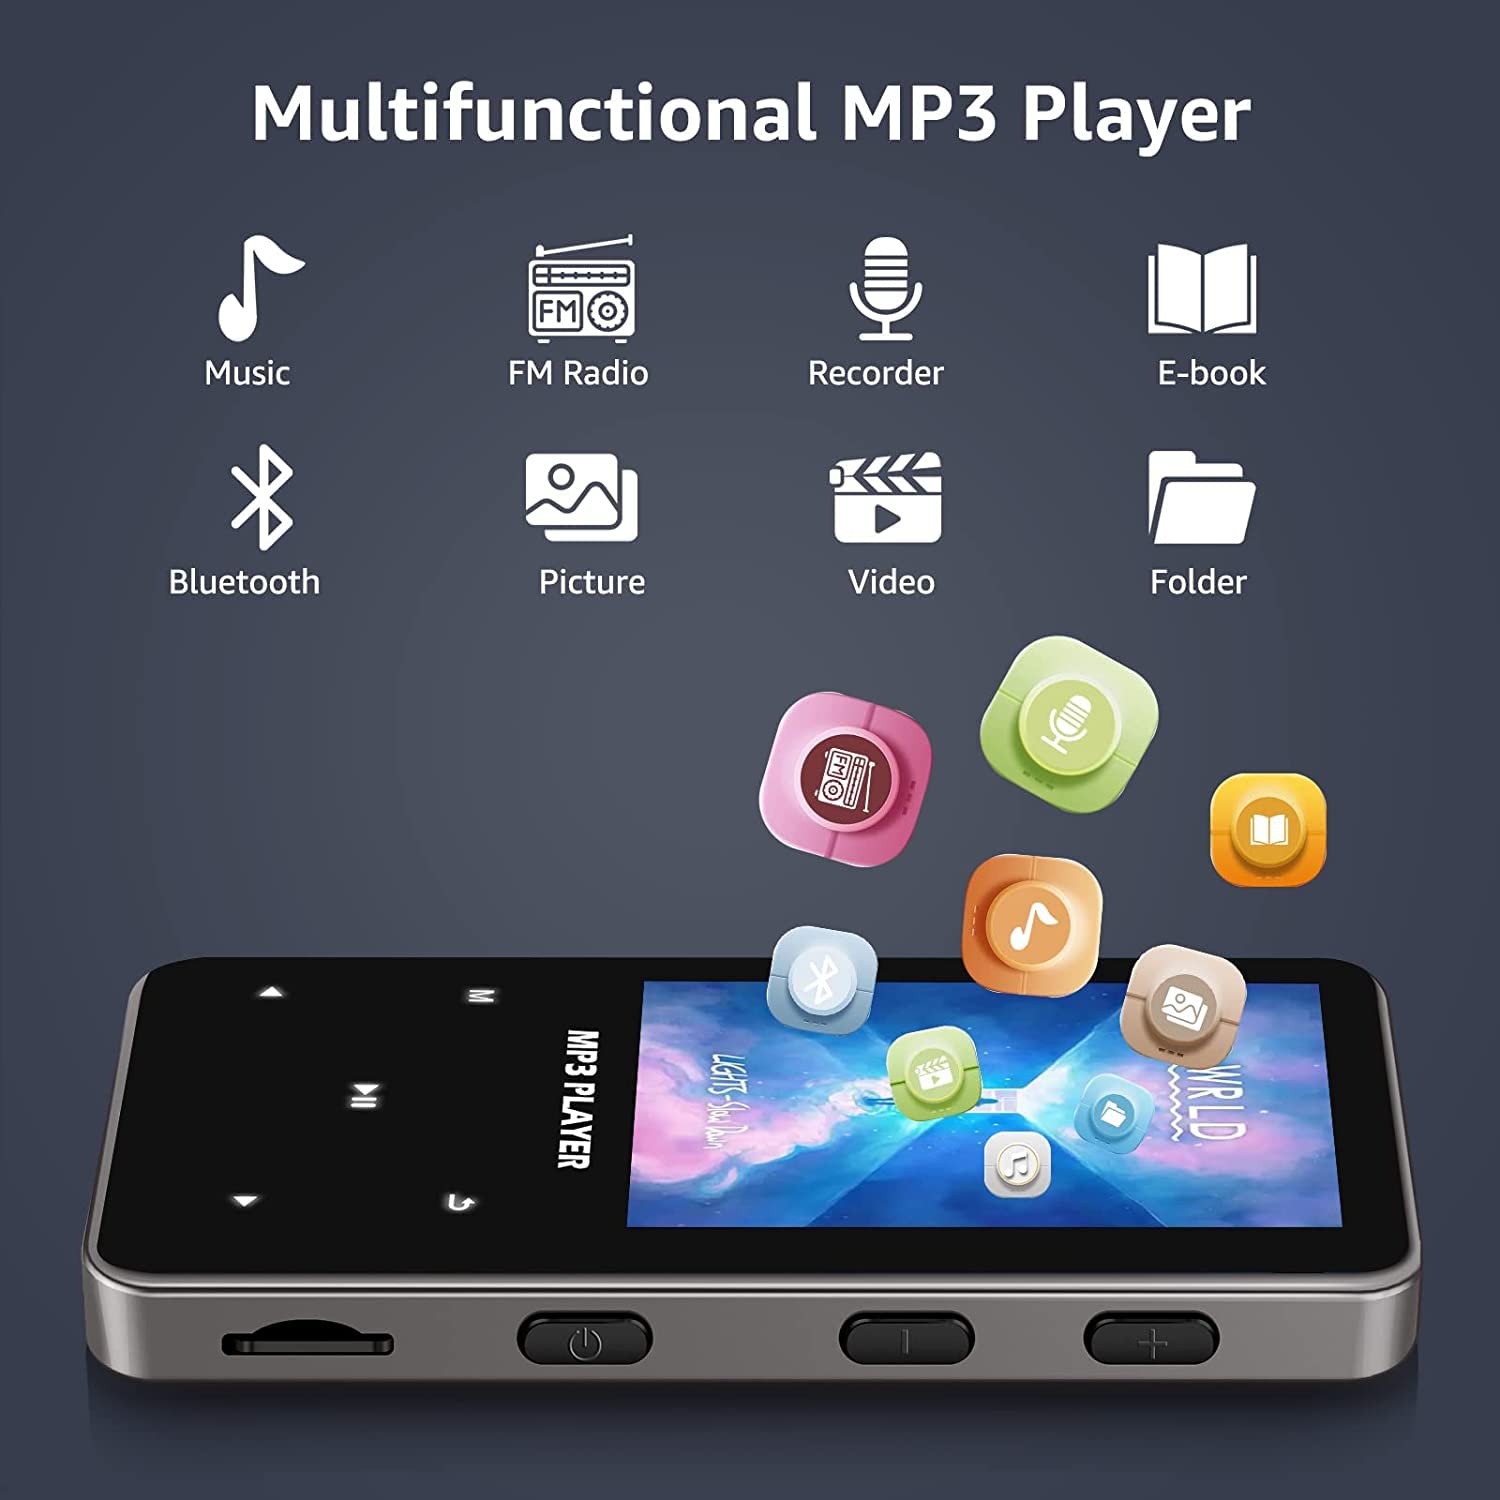 Aiworth 32GB MP3 Player Bluetooth 5.0 - Portable Multifunctional MP4 Player with FM Radio, Recorder, Mini Lossless Music Player for Sports and Running, Supports Up to 128GB